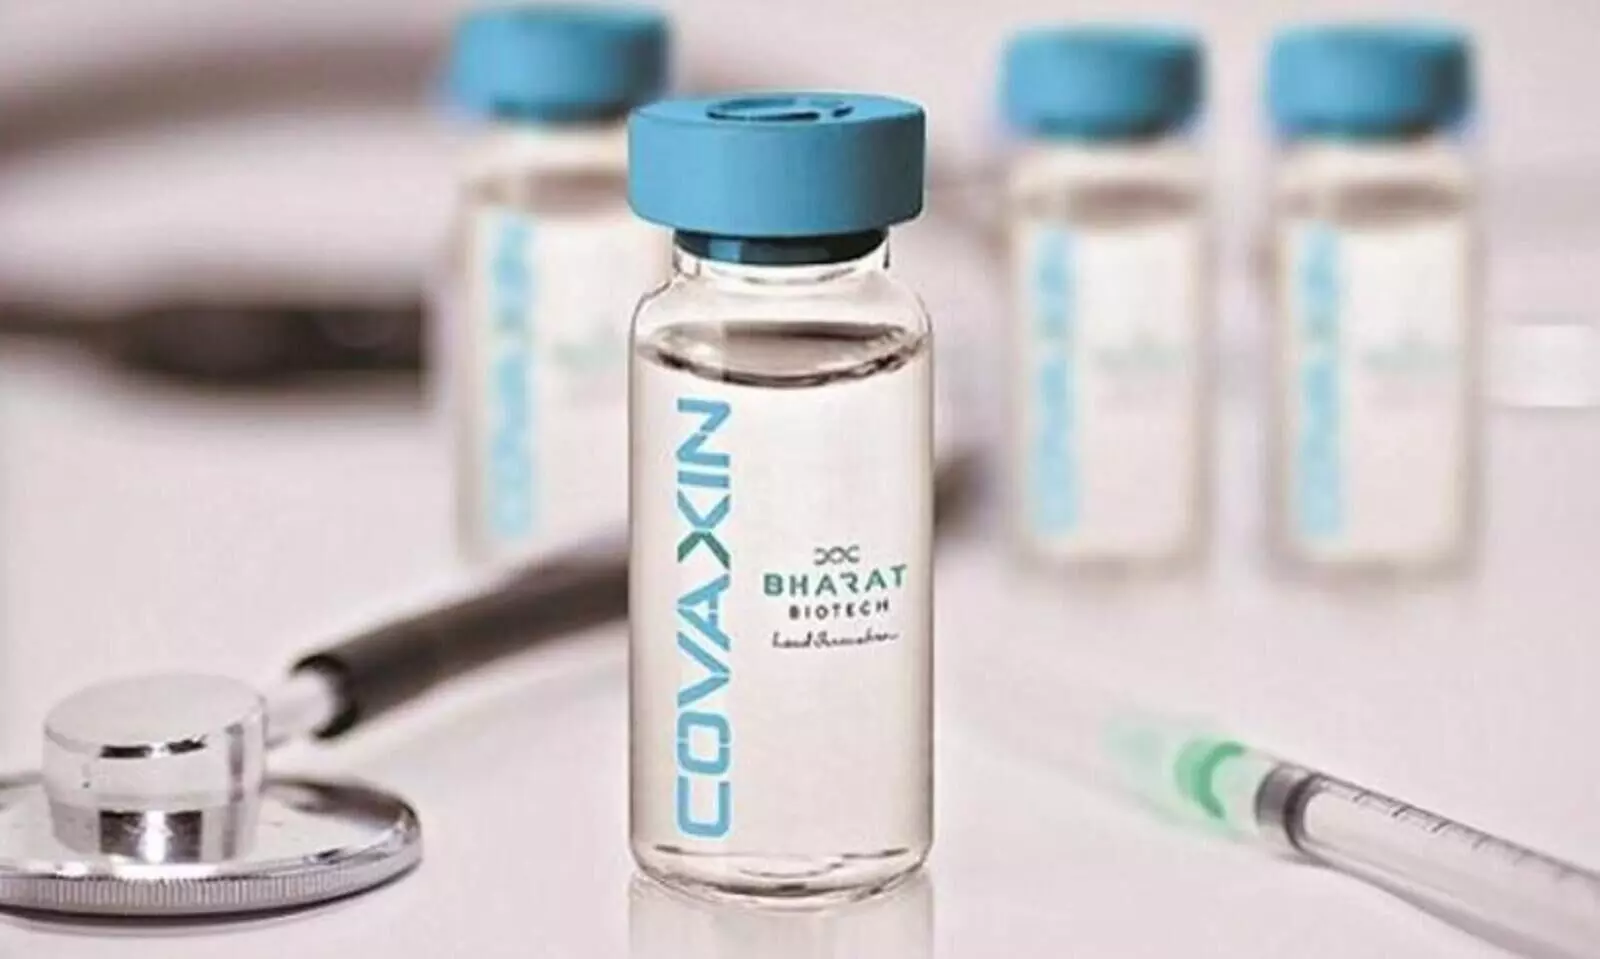 600 for states, 1200 for private hospitals: Bharat Biotech on Covaxin pricing